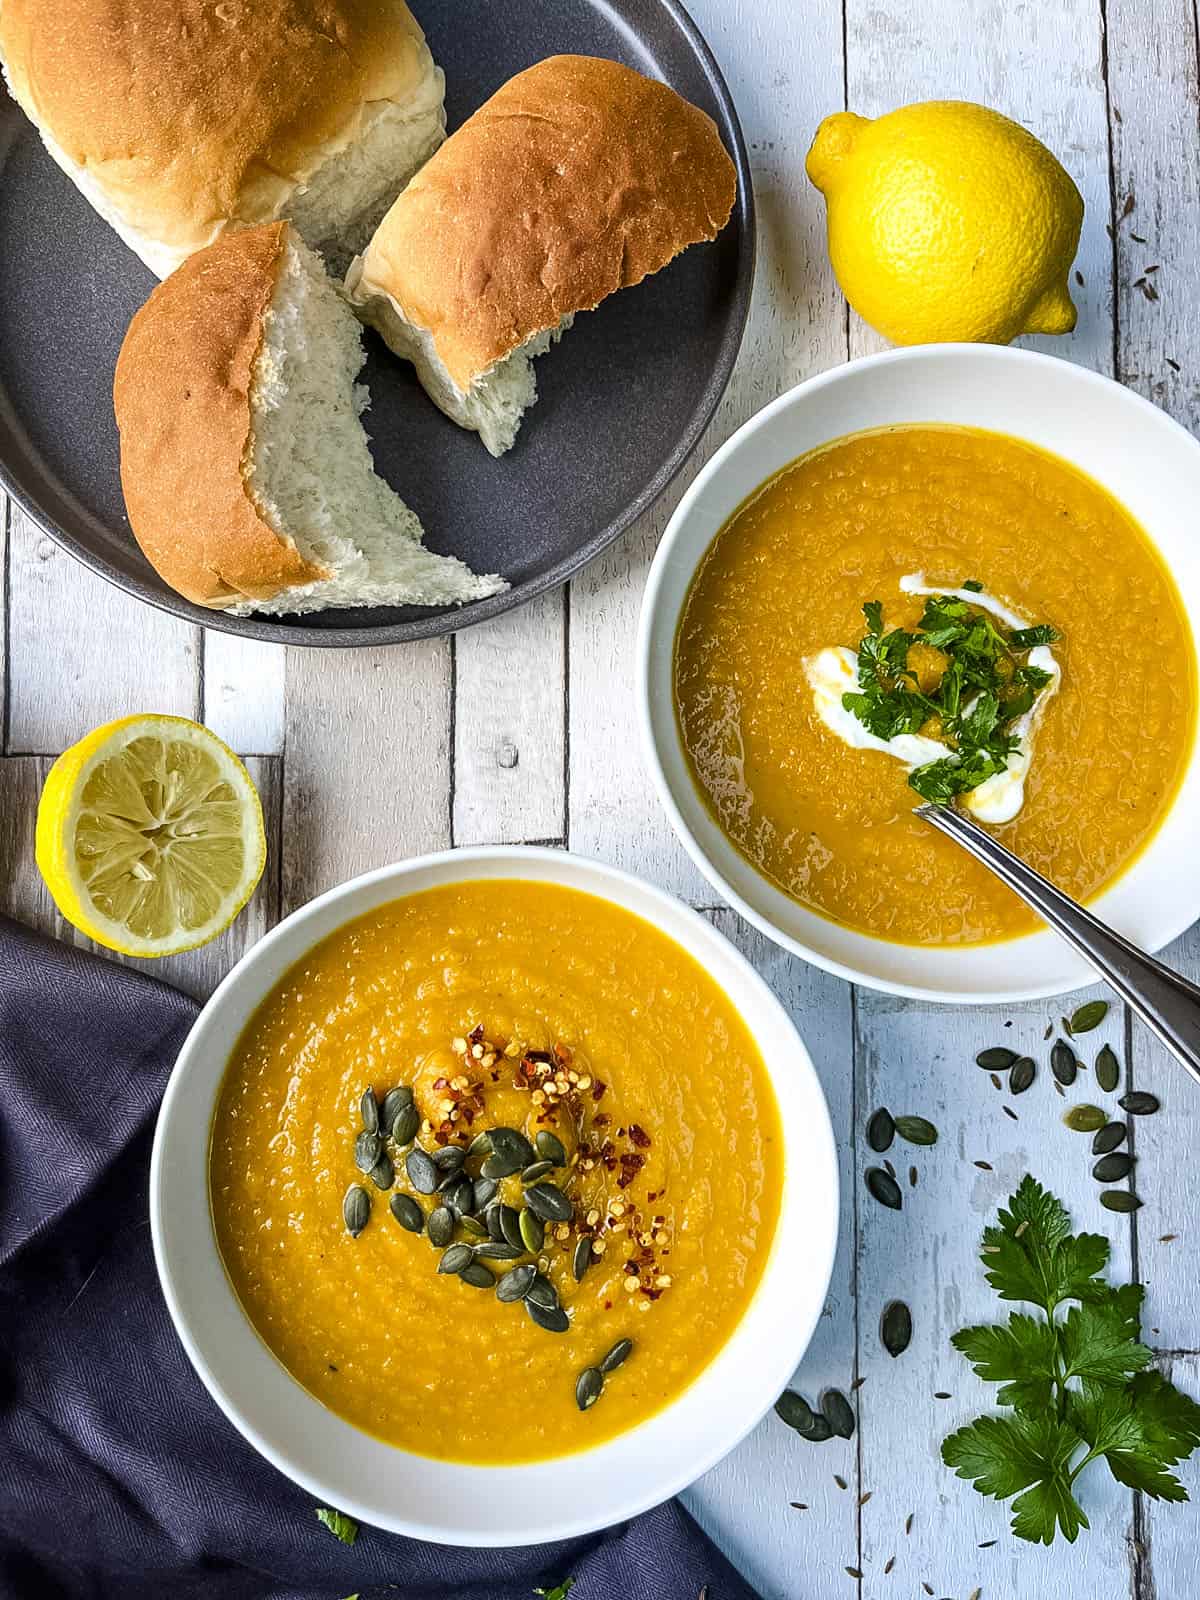 carrot and cumin soup in bowls served with bread rolls.